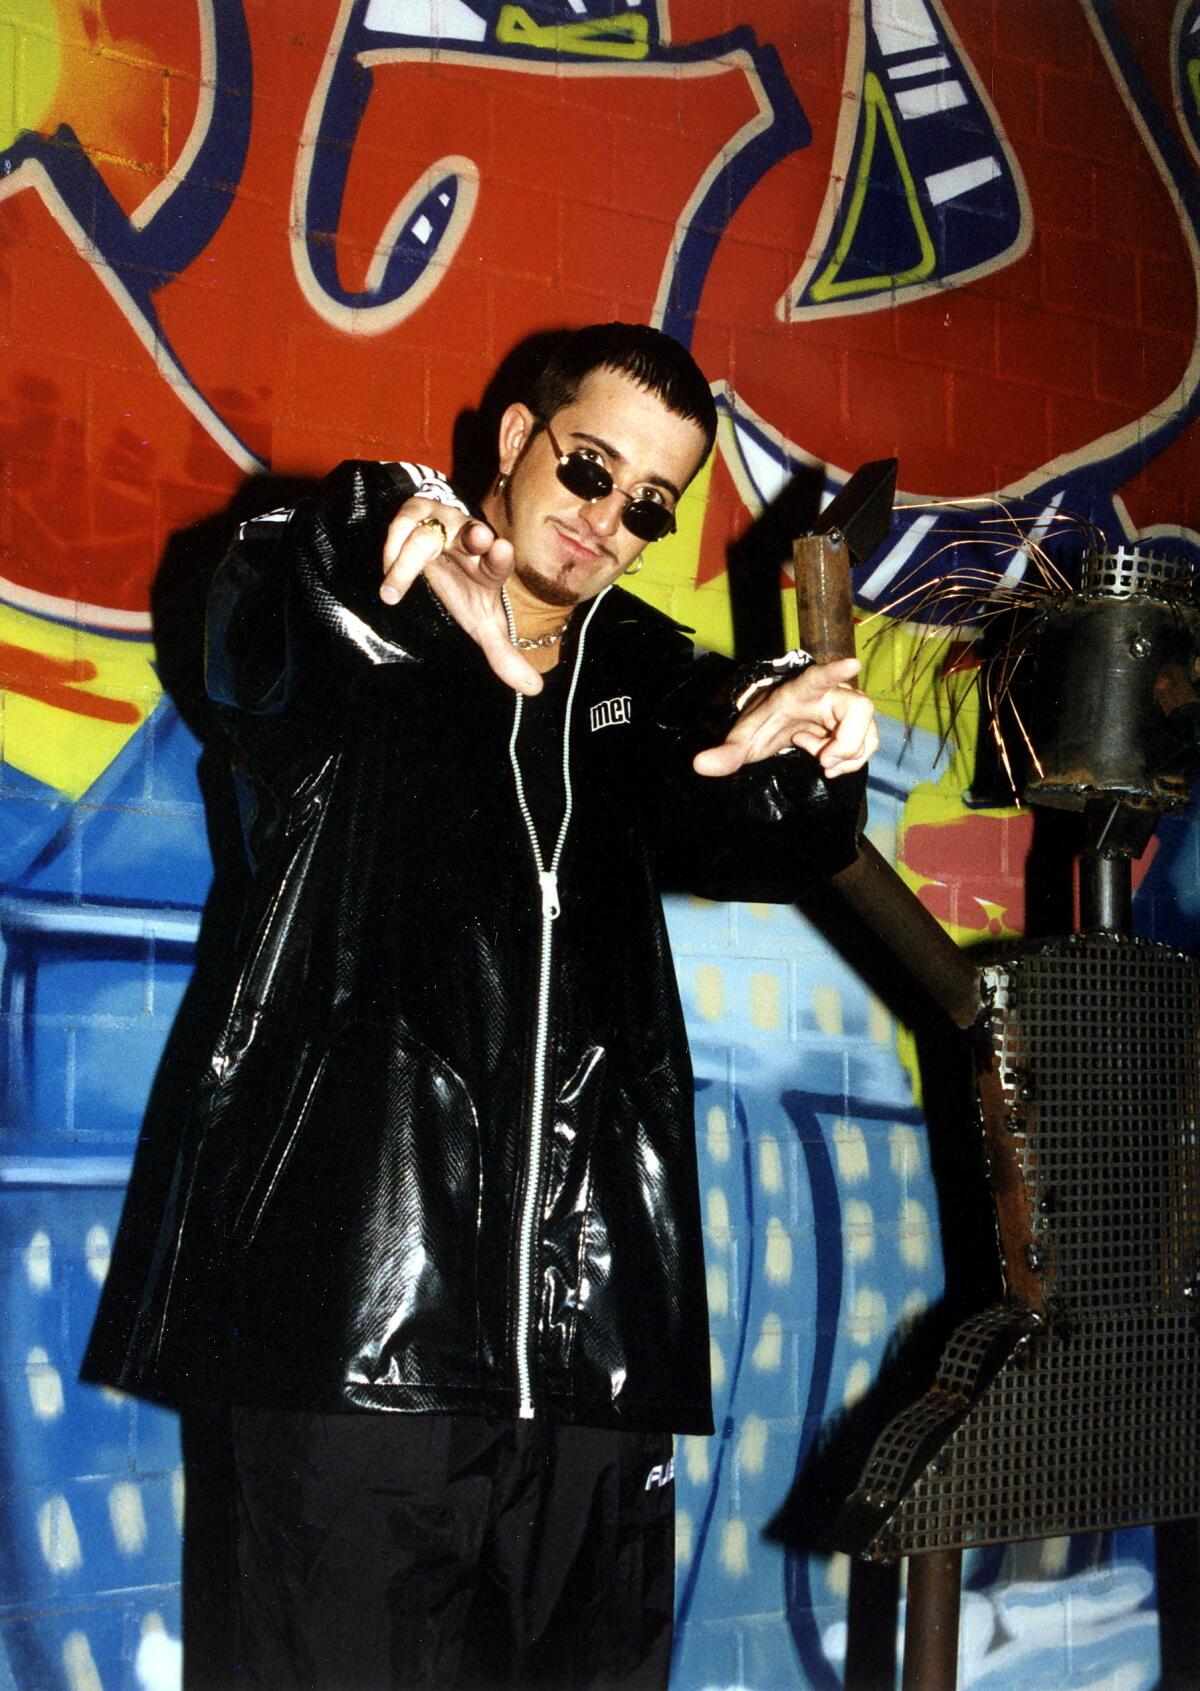 Brian Gillis points at the camera wearing sunglasses and a black leather jacket. 